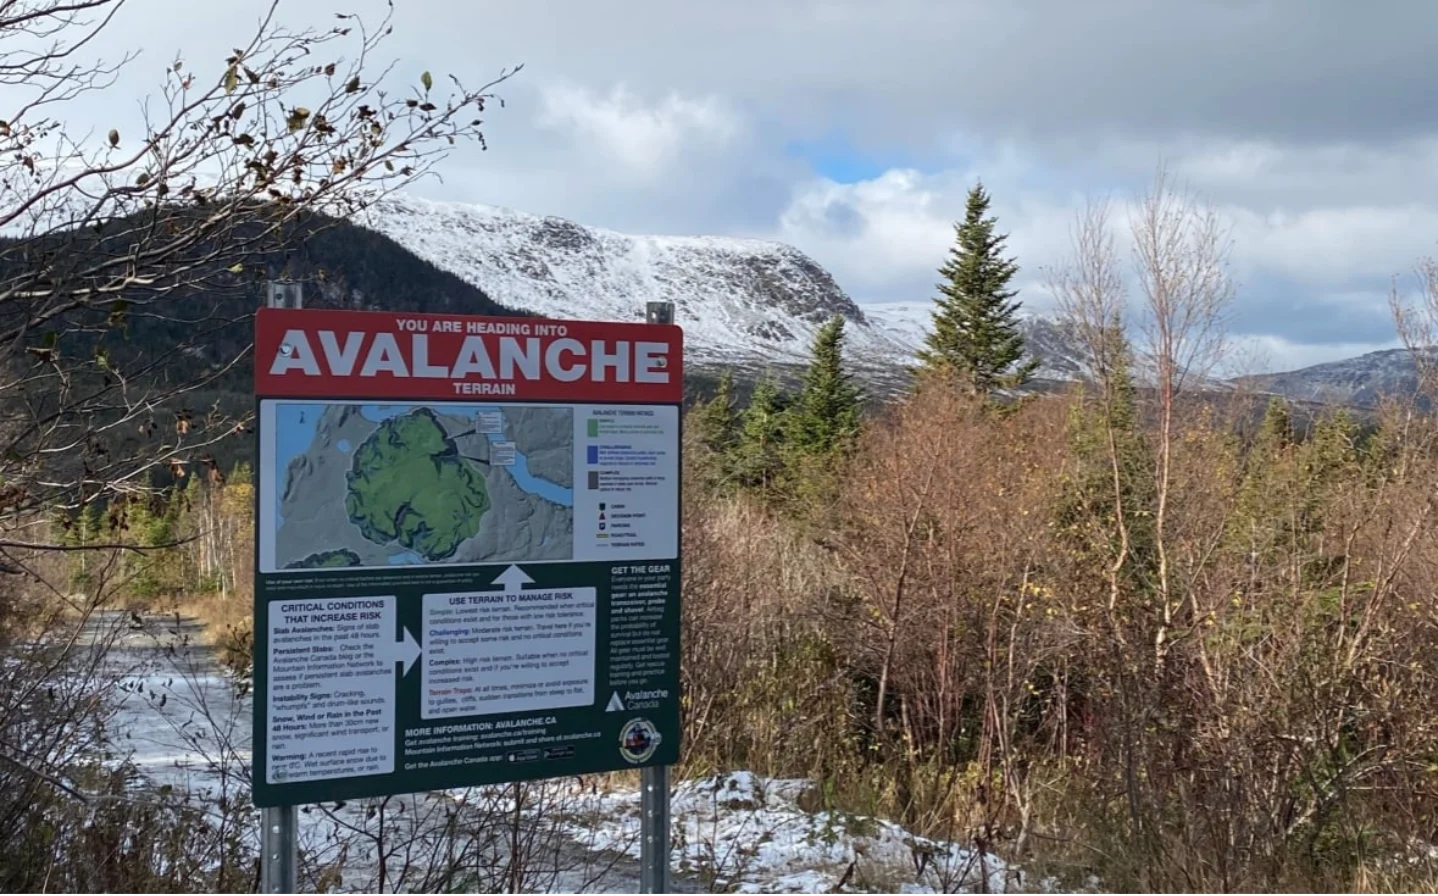 The field team has posted safety information at several avalanche-prone areas on Newfoundland's west coast, including this one at a trailhead in the Blow Me Down Mountains outside Corner Brook. (Submitted by Andy Nichols)